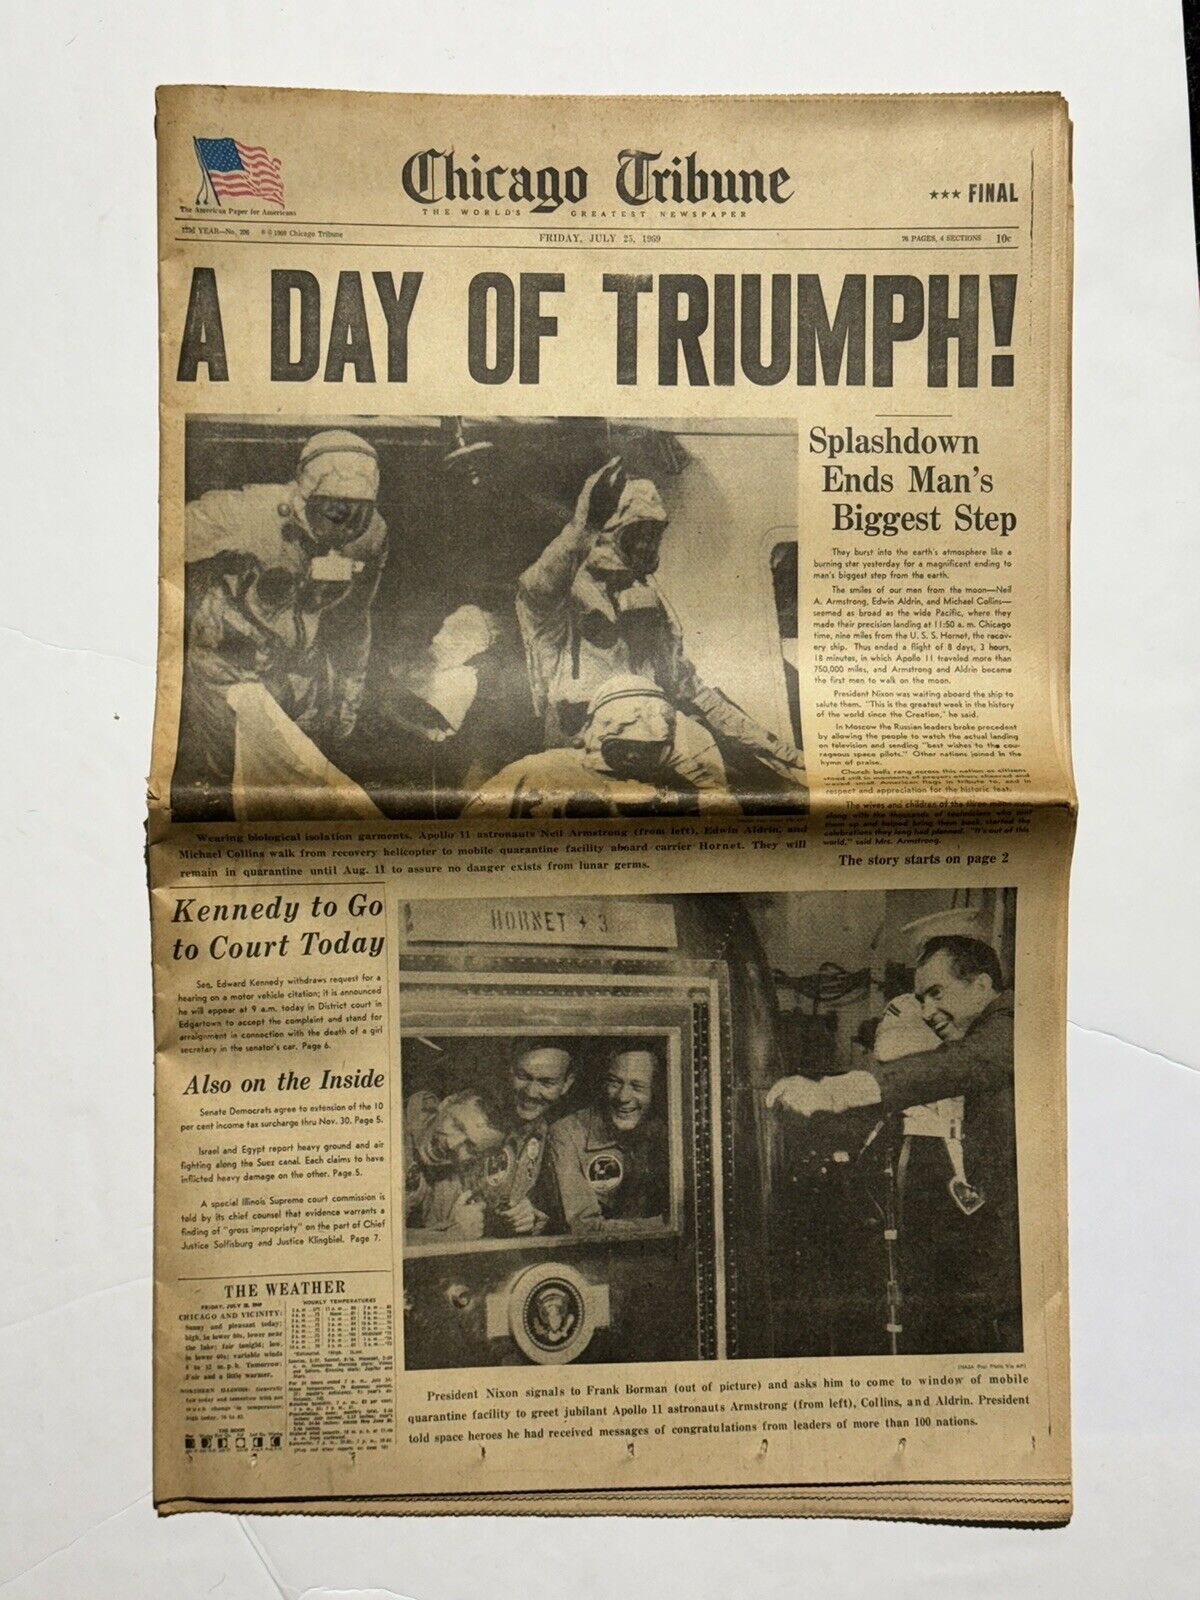 Chicago Tribune A DAY OF TRIUMPH Friday, July 25, 1969, ORIGINAL COMPLETE PRINT